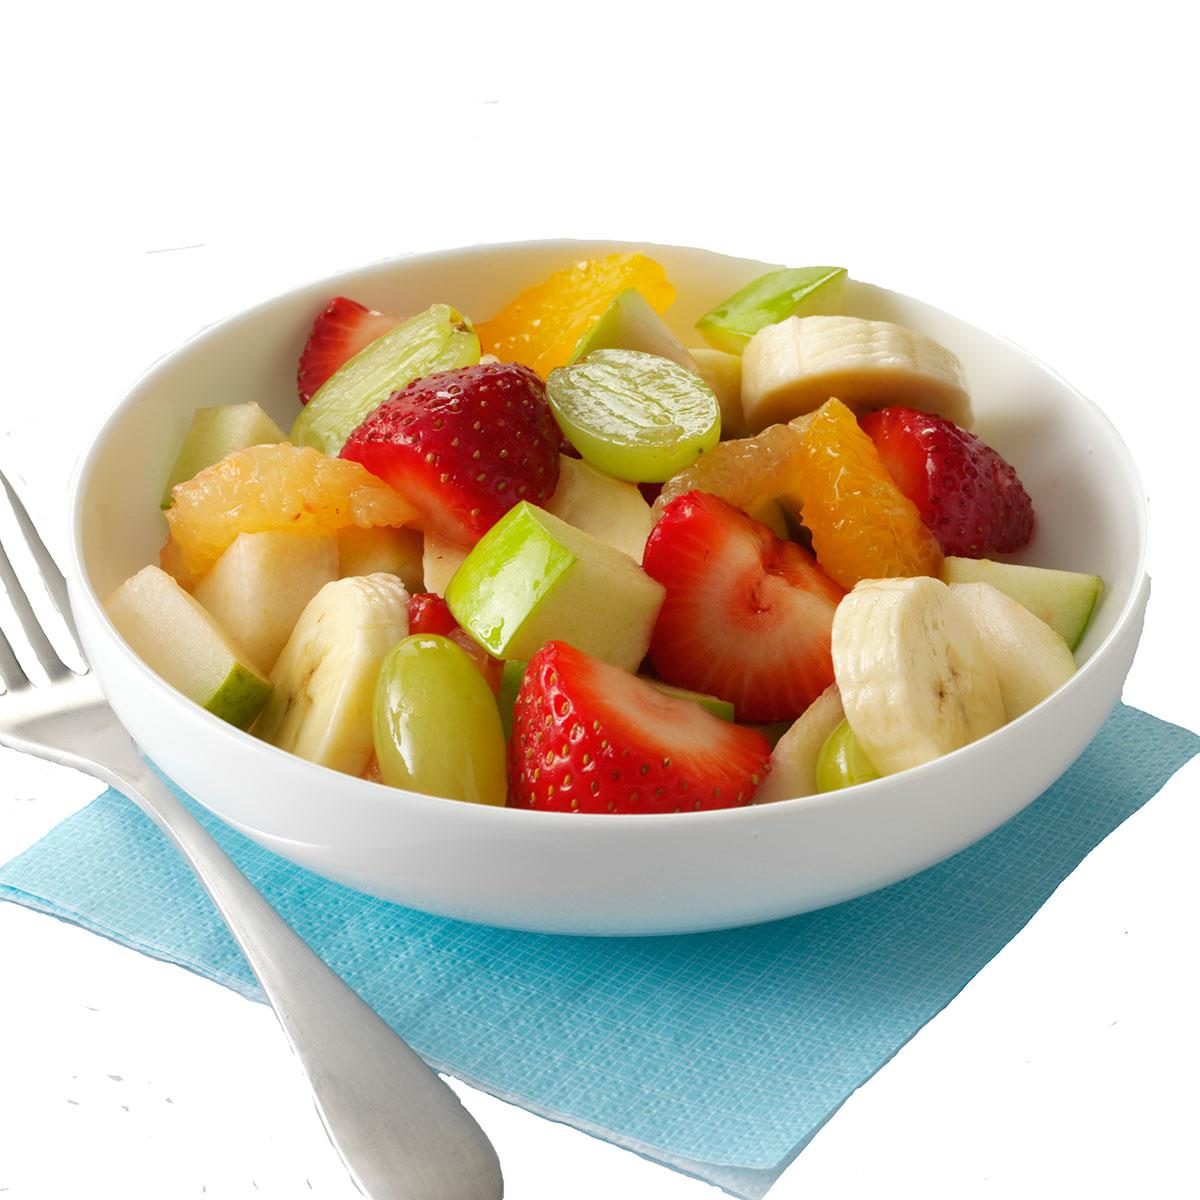 Chilled Mixed Fruit Recipe: How to Make It